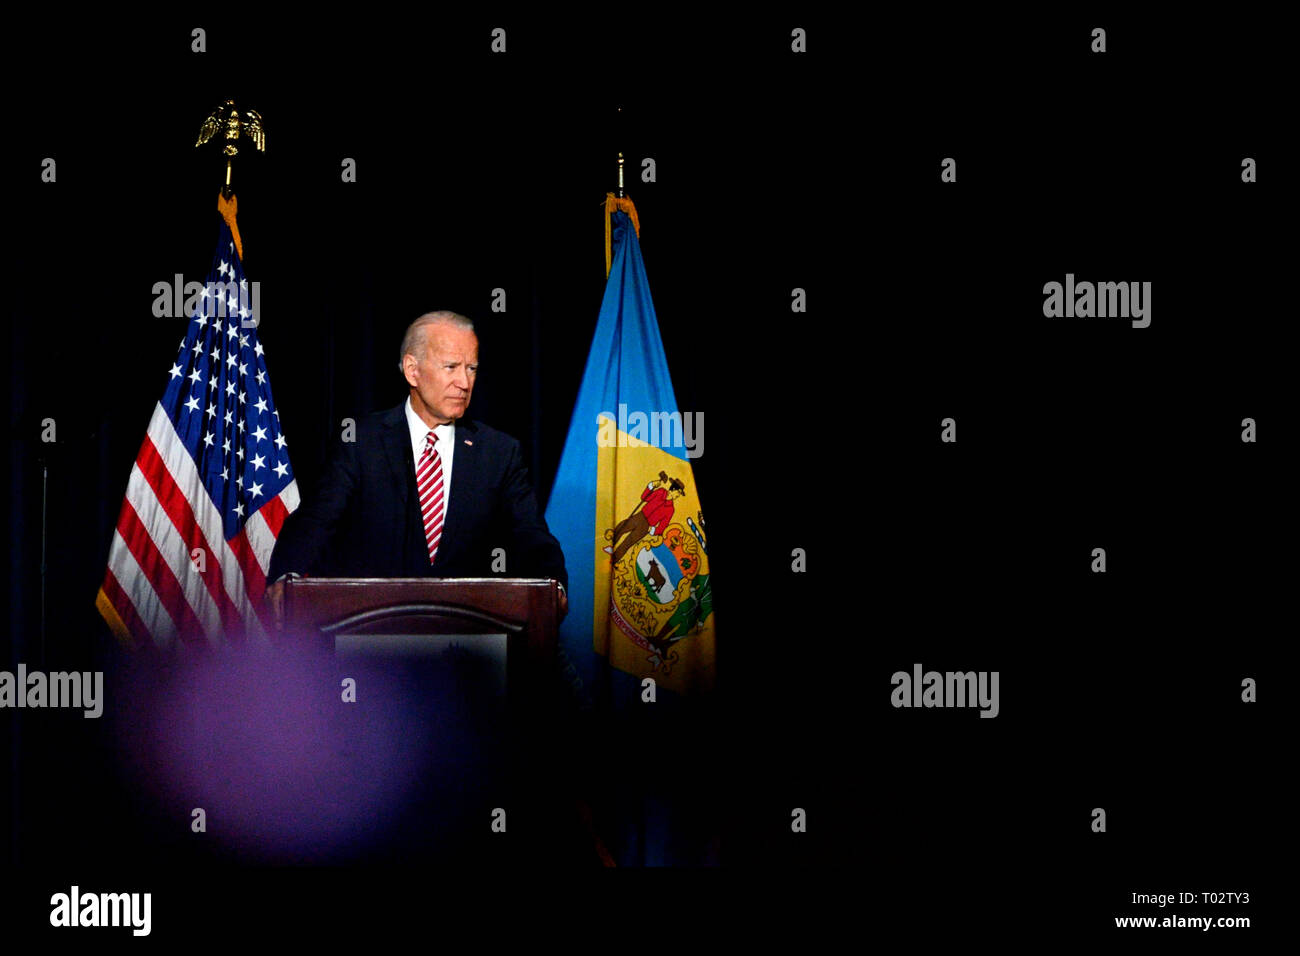 Delaware, USA. 16th March 2019. Joe Biden delivers the keynote speech at the First State Democratic Dinner at the Rollins Center in Dover, DE on March 16, 2019. The former U.S. Vice President refrained from announcing his candidacy, even-though early polls conducted in March indicate former Vice President Biden as the favorite of a large Democratic field of candidates. Credit: OOgImages/Alamy Live News Stock Photo